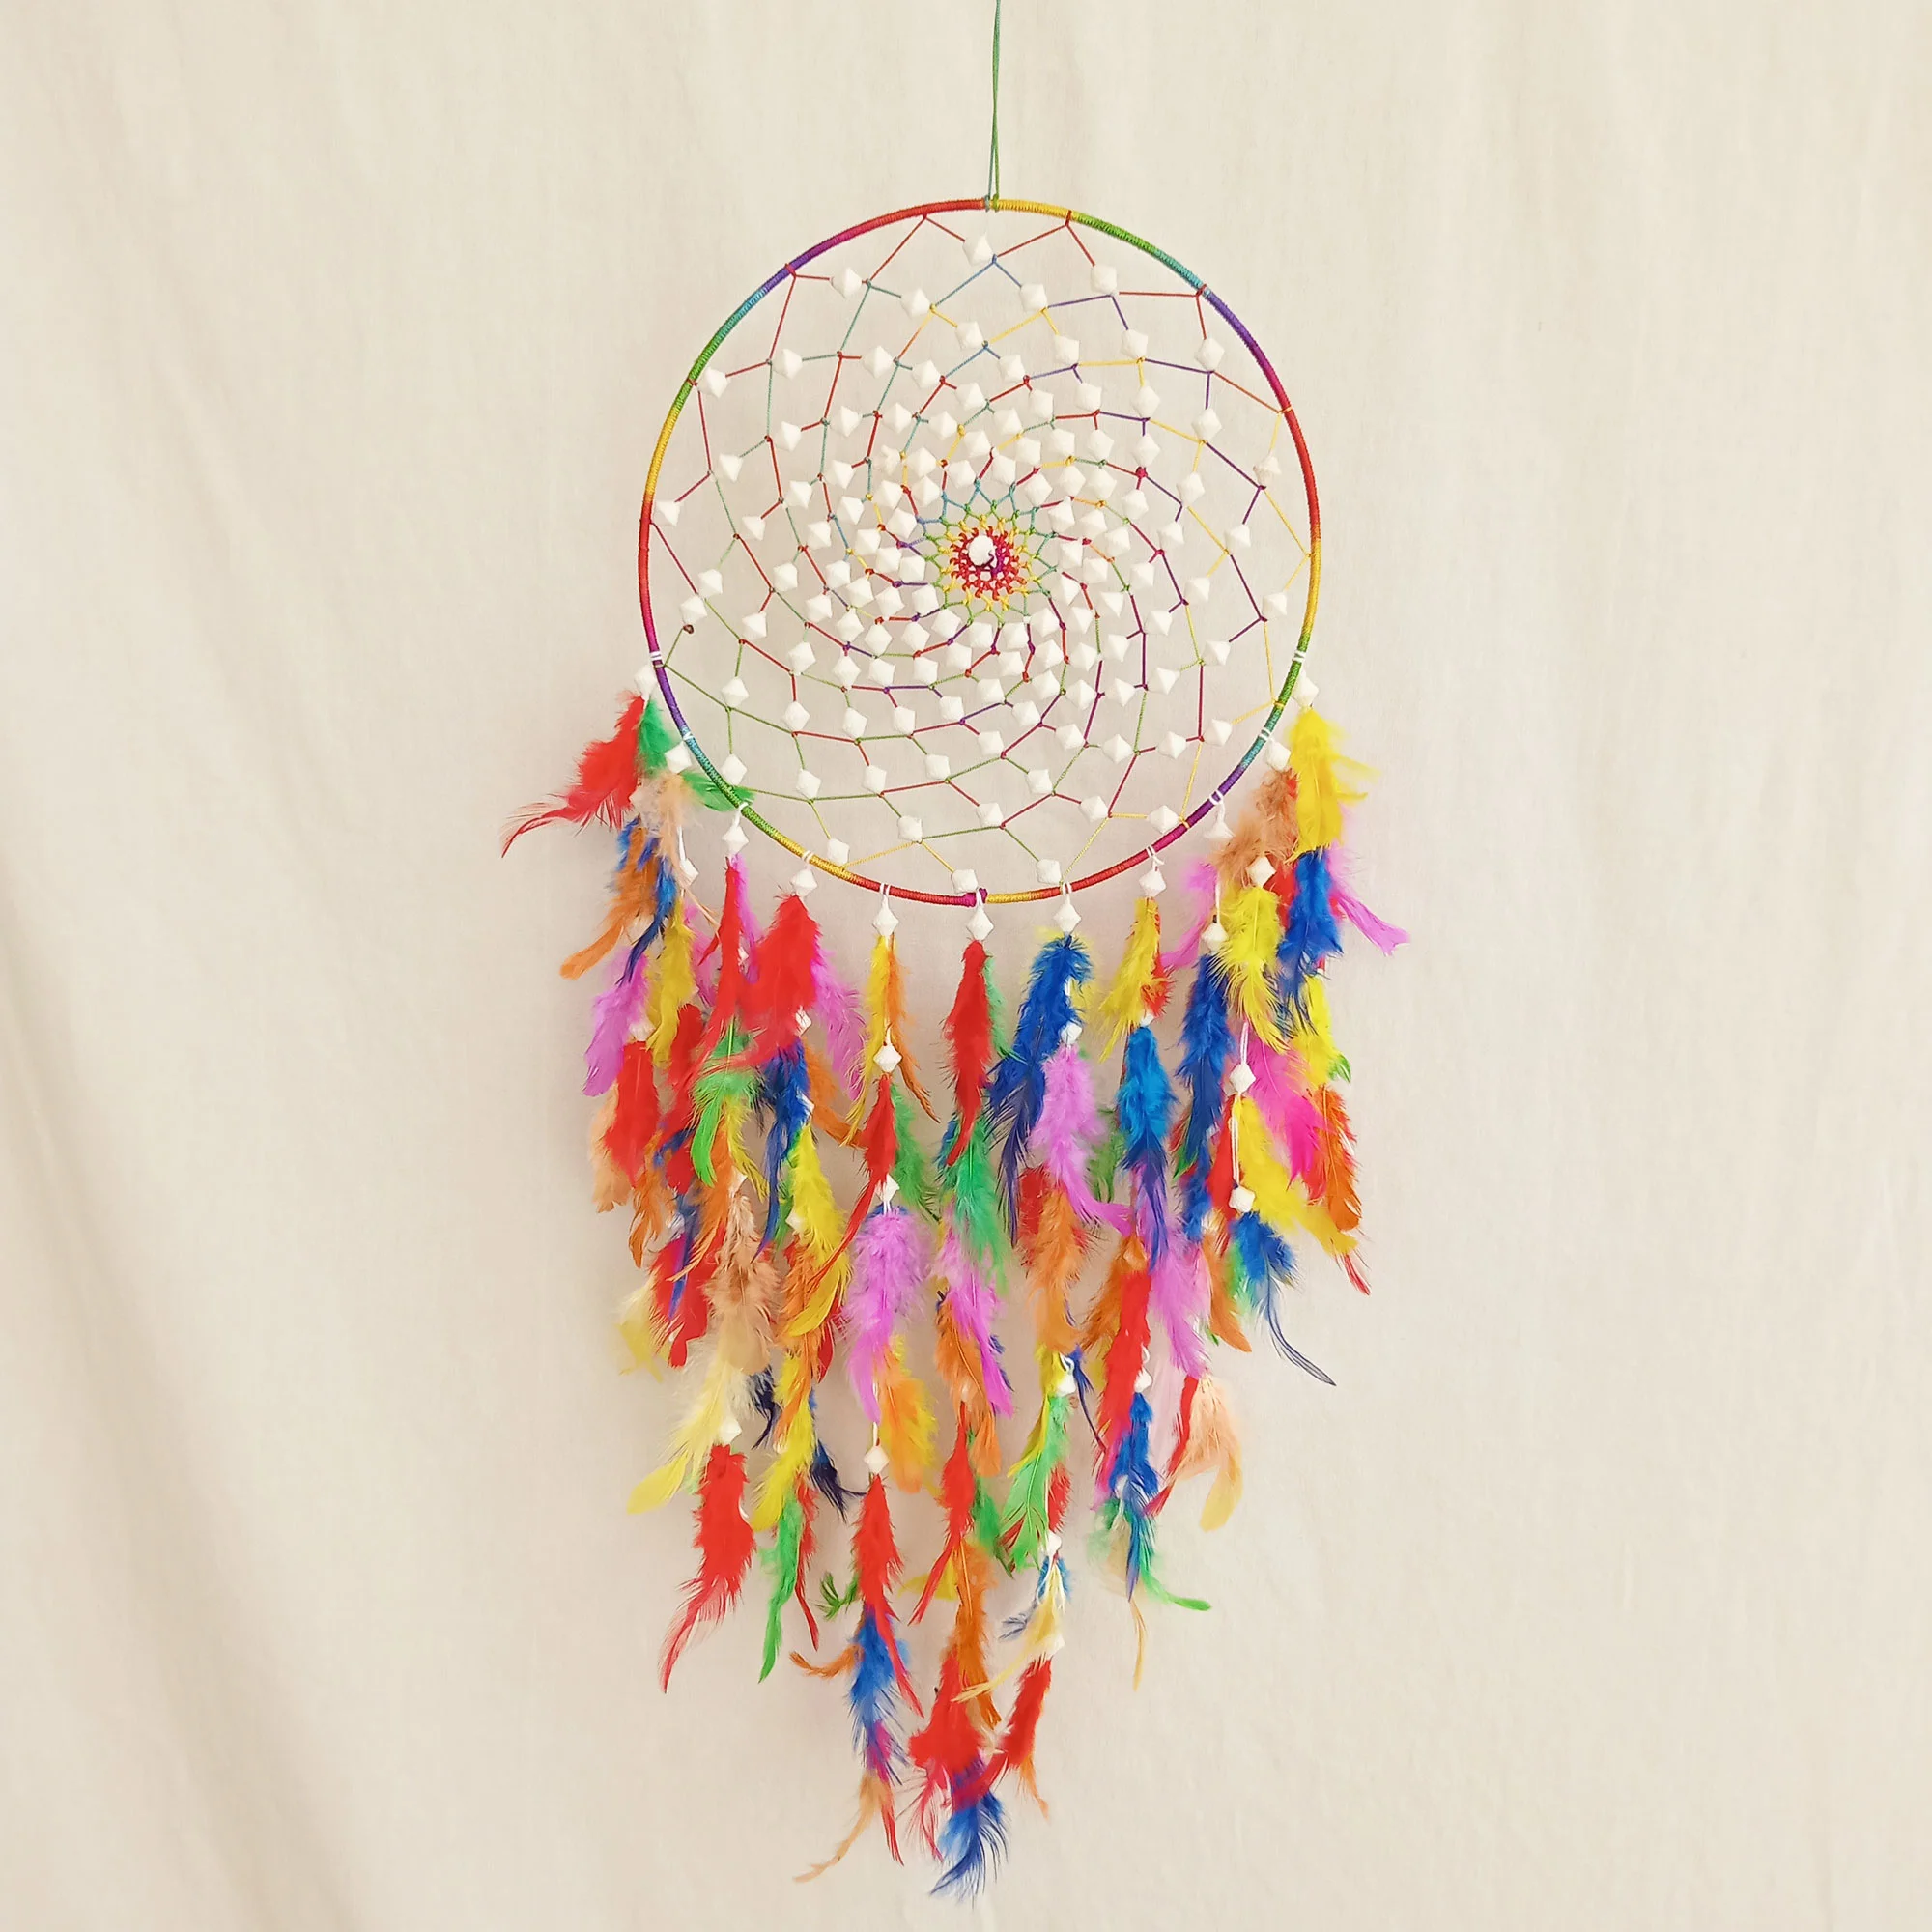 Beautifull Multicolour Dream Catcher For Wall Hangings, Home Decor, Handmade for Bedroom, Balcony Decorative with Feathers and Golden Beads